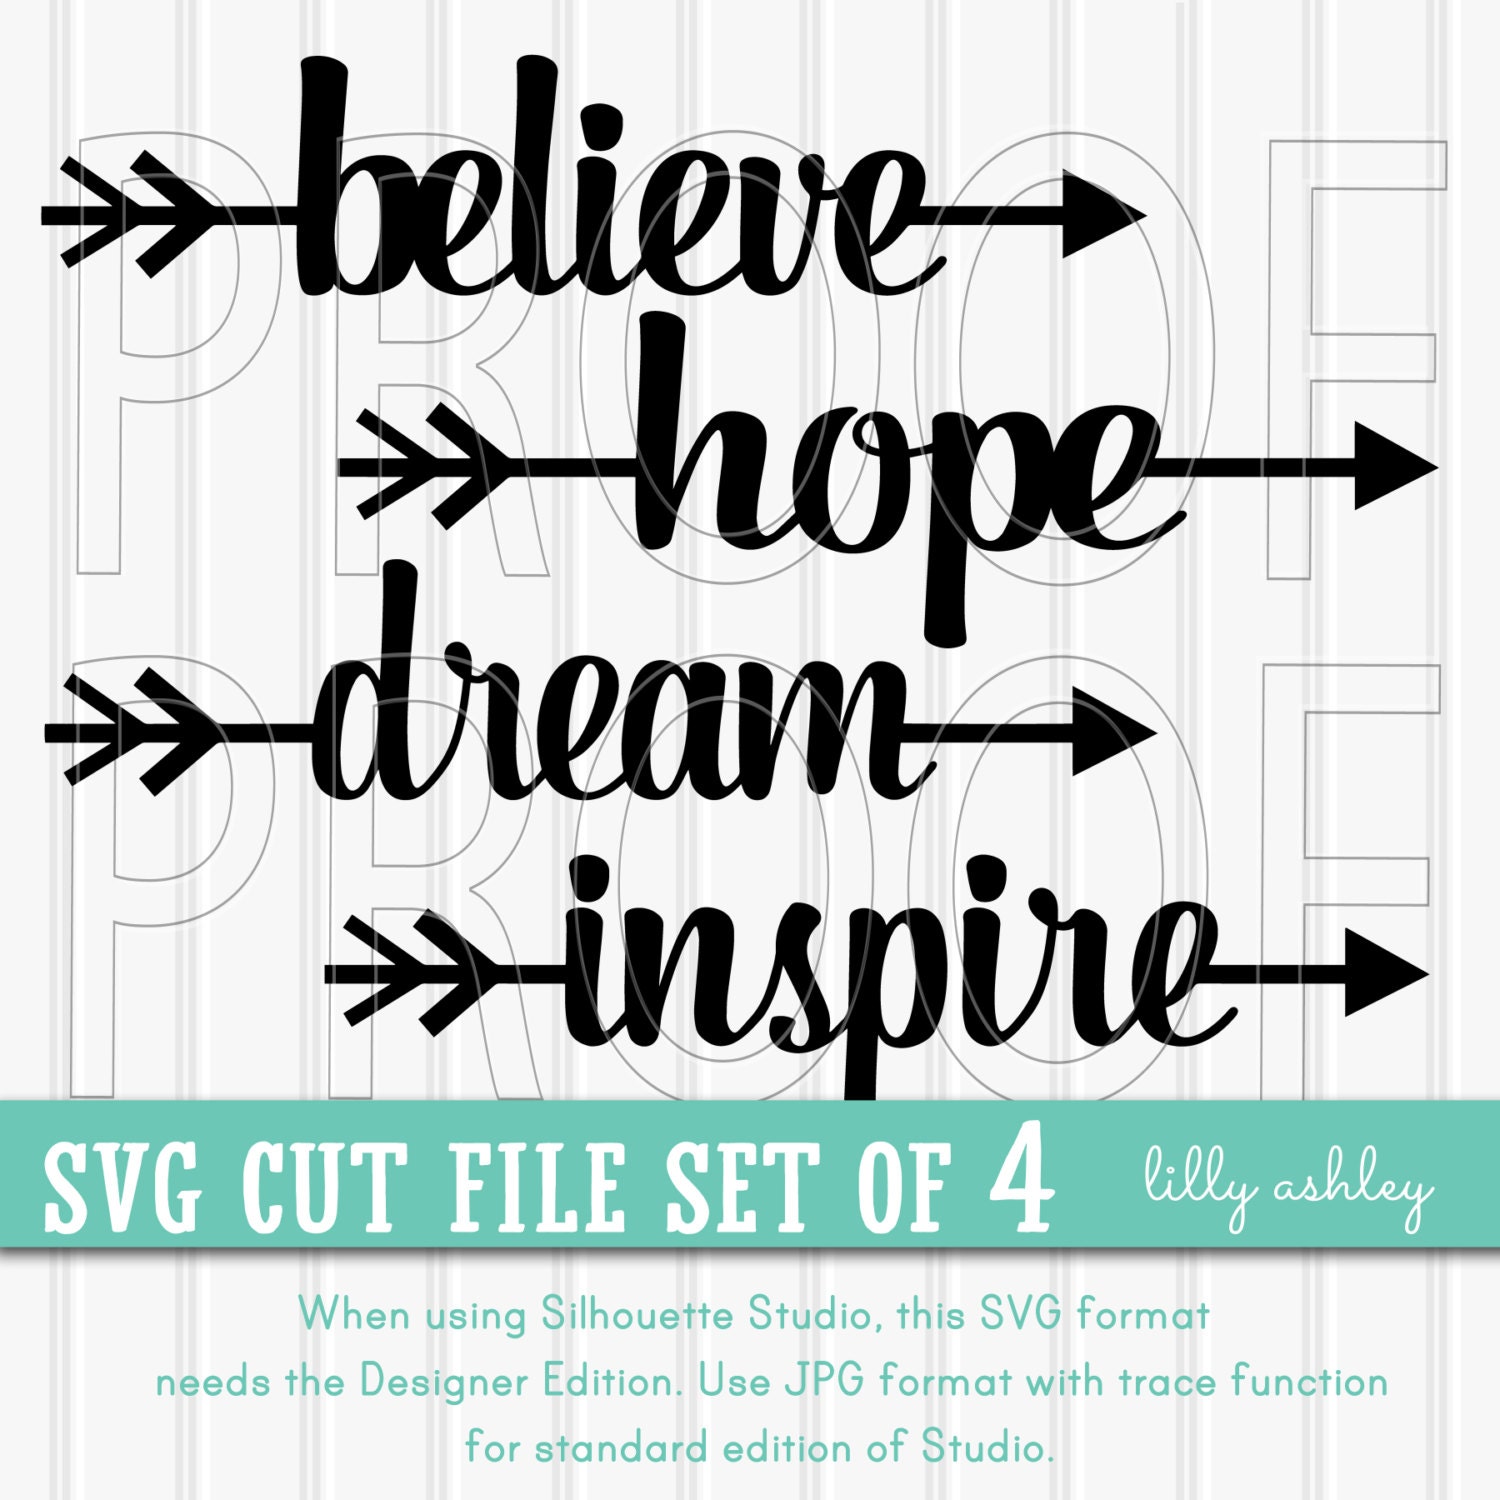 SVG Files set of 4 cut filesCommercial use ok Includes PNG